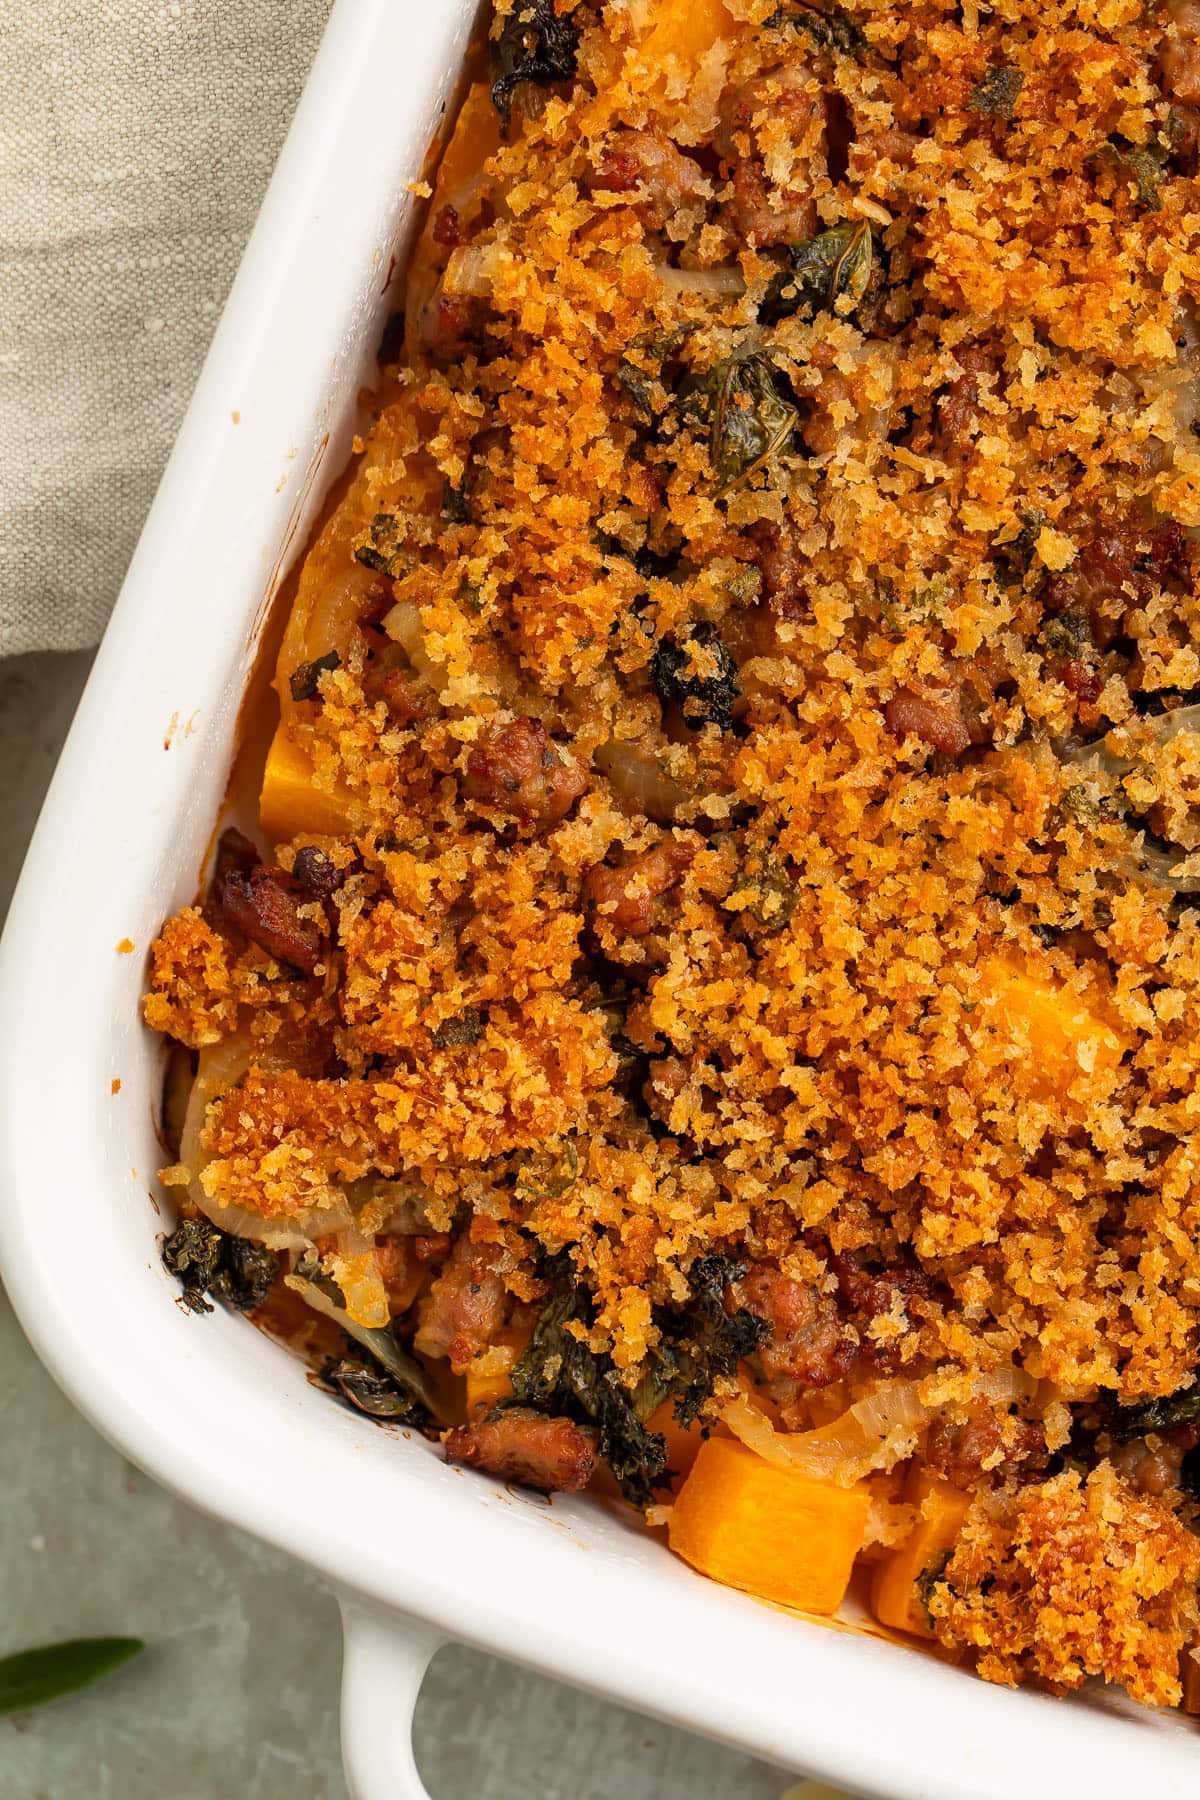 Overhead view of a large white casserole dish, angled on a table, holding a butternut squash casserole topped with breadcrumbs.